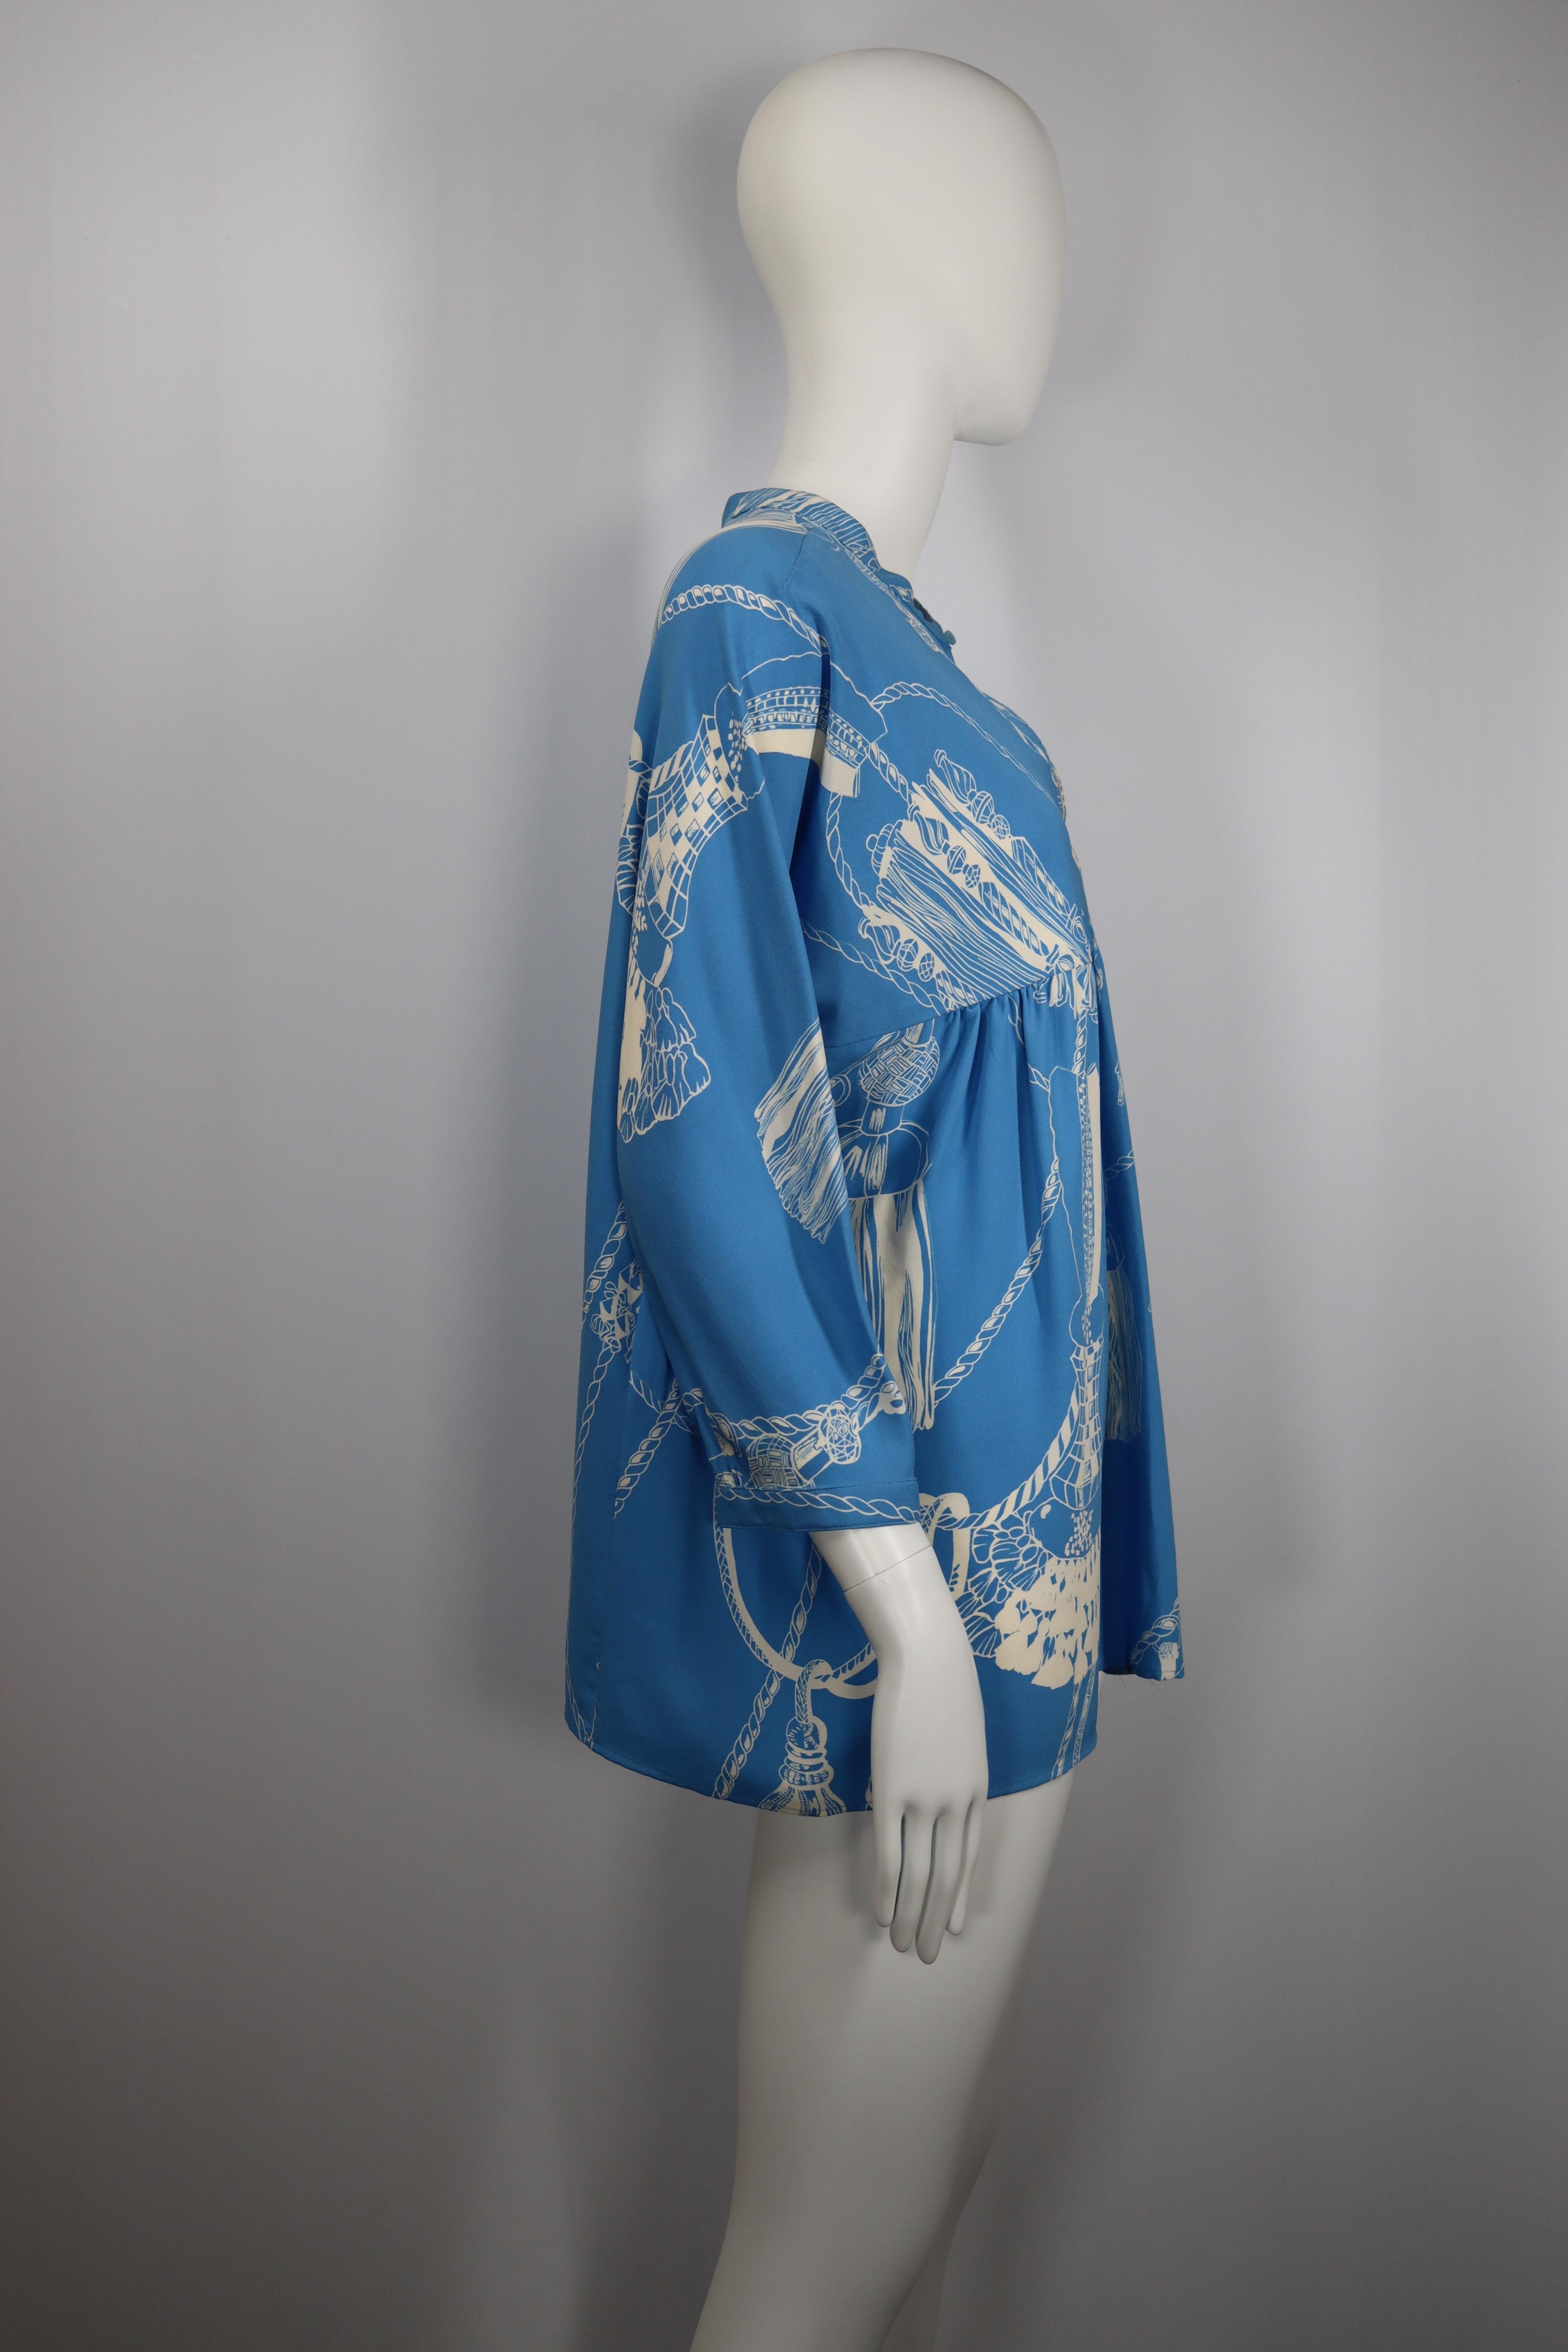 Very good condition, shows some signs of use and wear but nothing visible
Blue silk shirt with white prints with a button at the top and an open neckline 
Height 67 cm / 26 